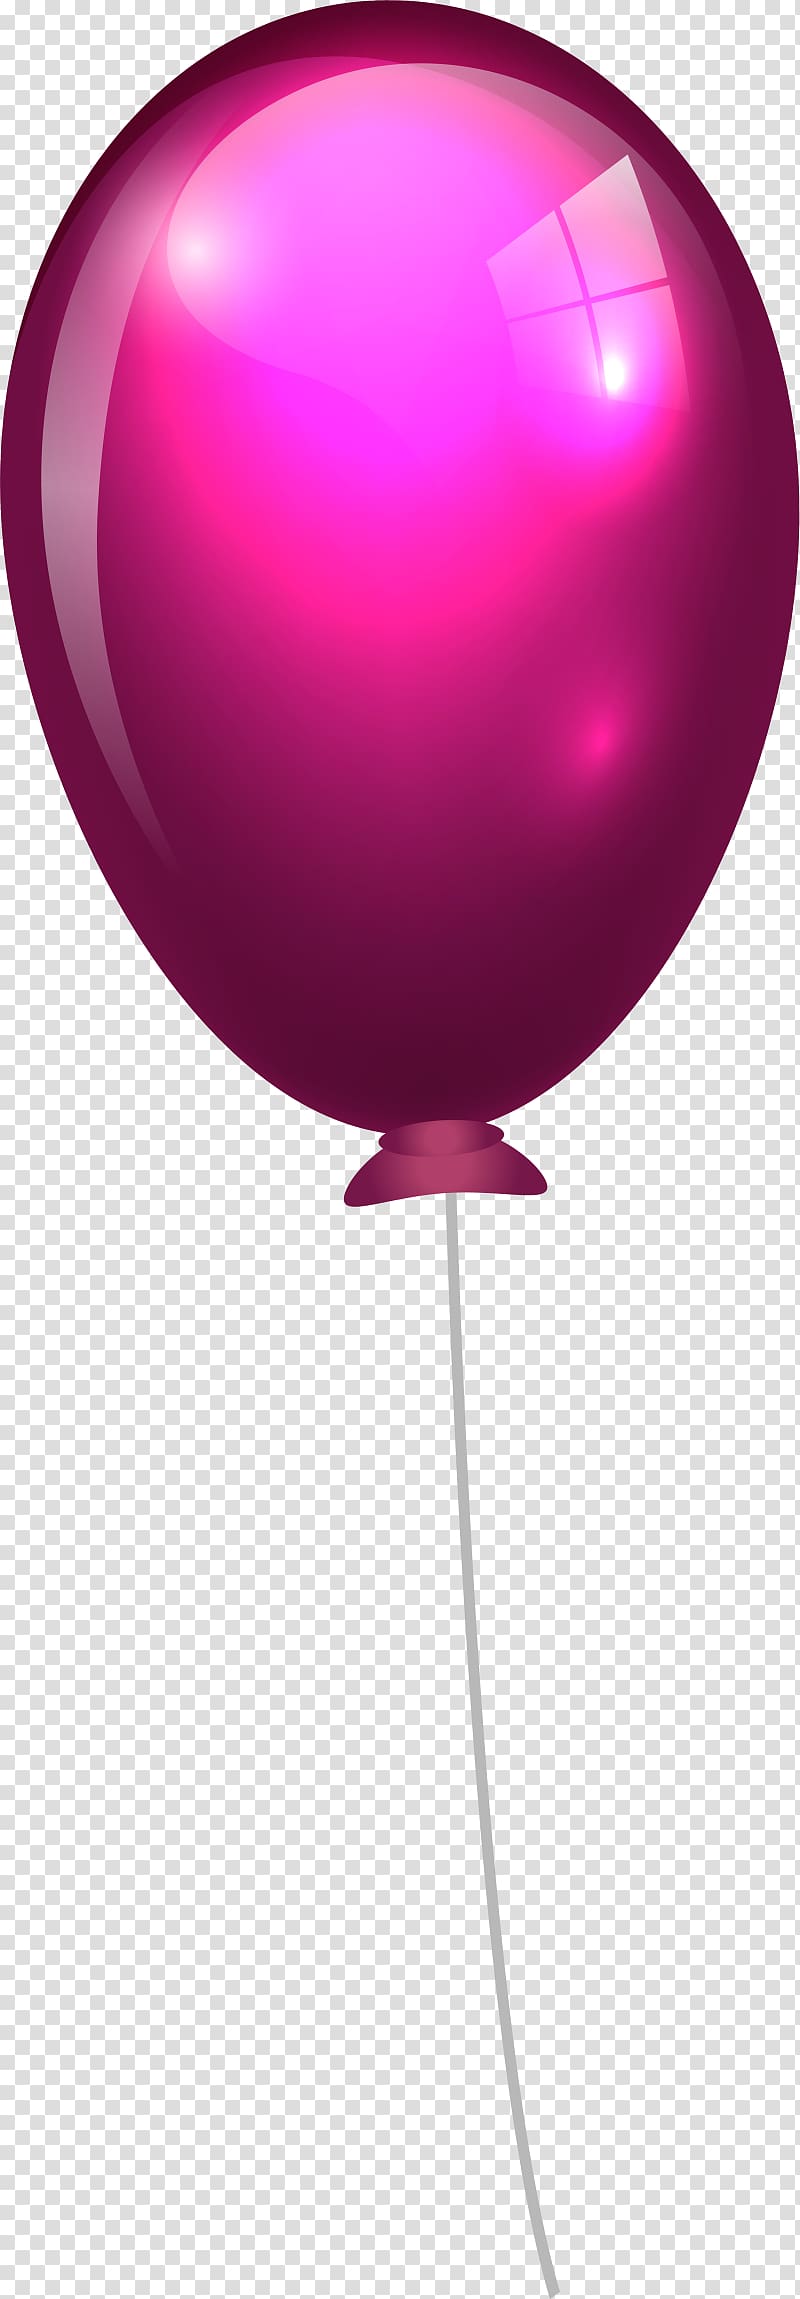 Balloon Rope Purple, Hand painted purple balloon rope transparent background PNG clipart